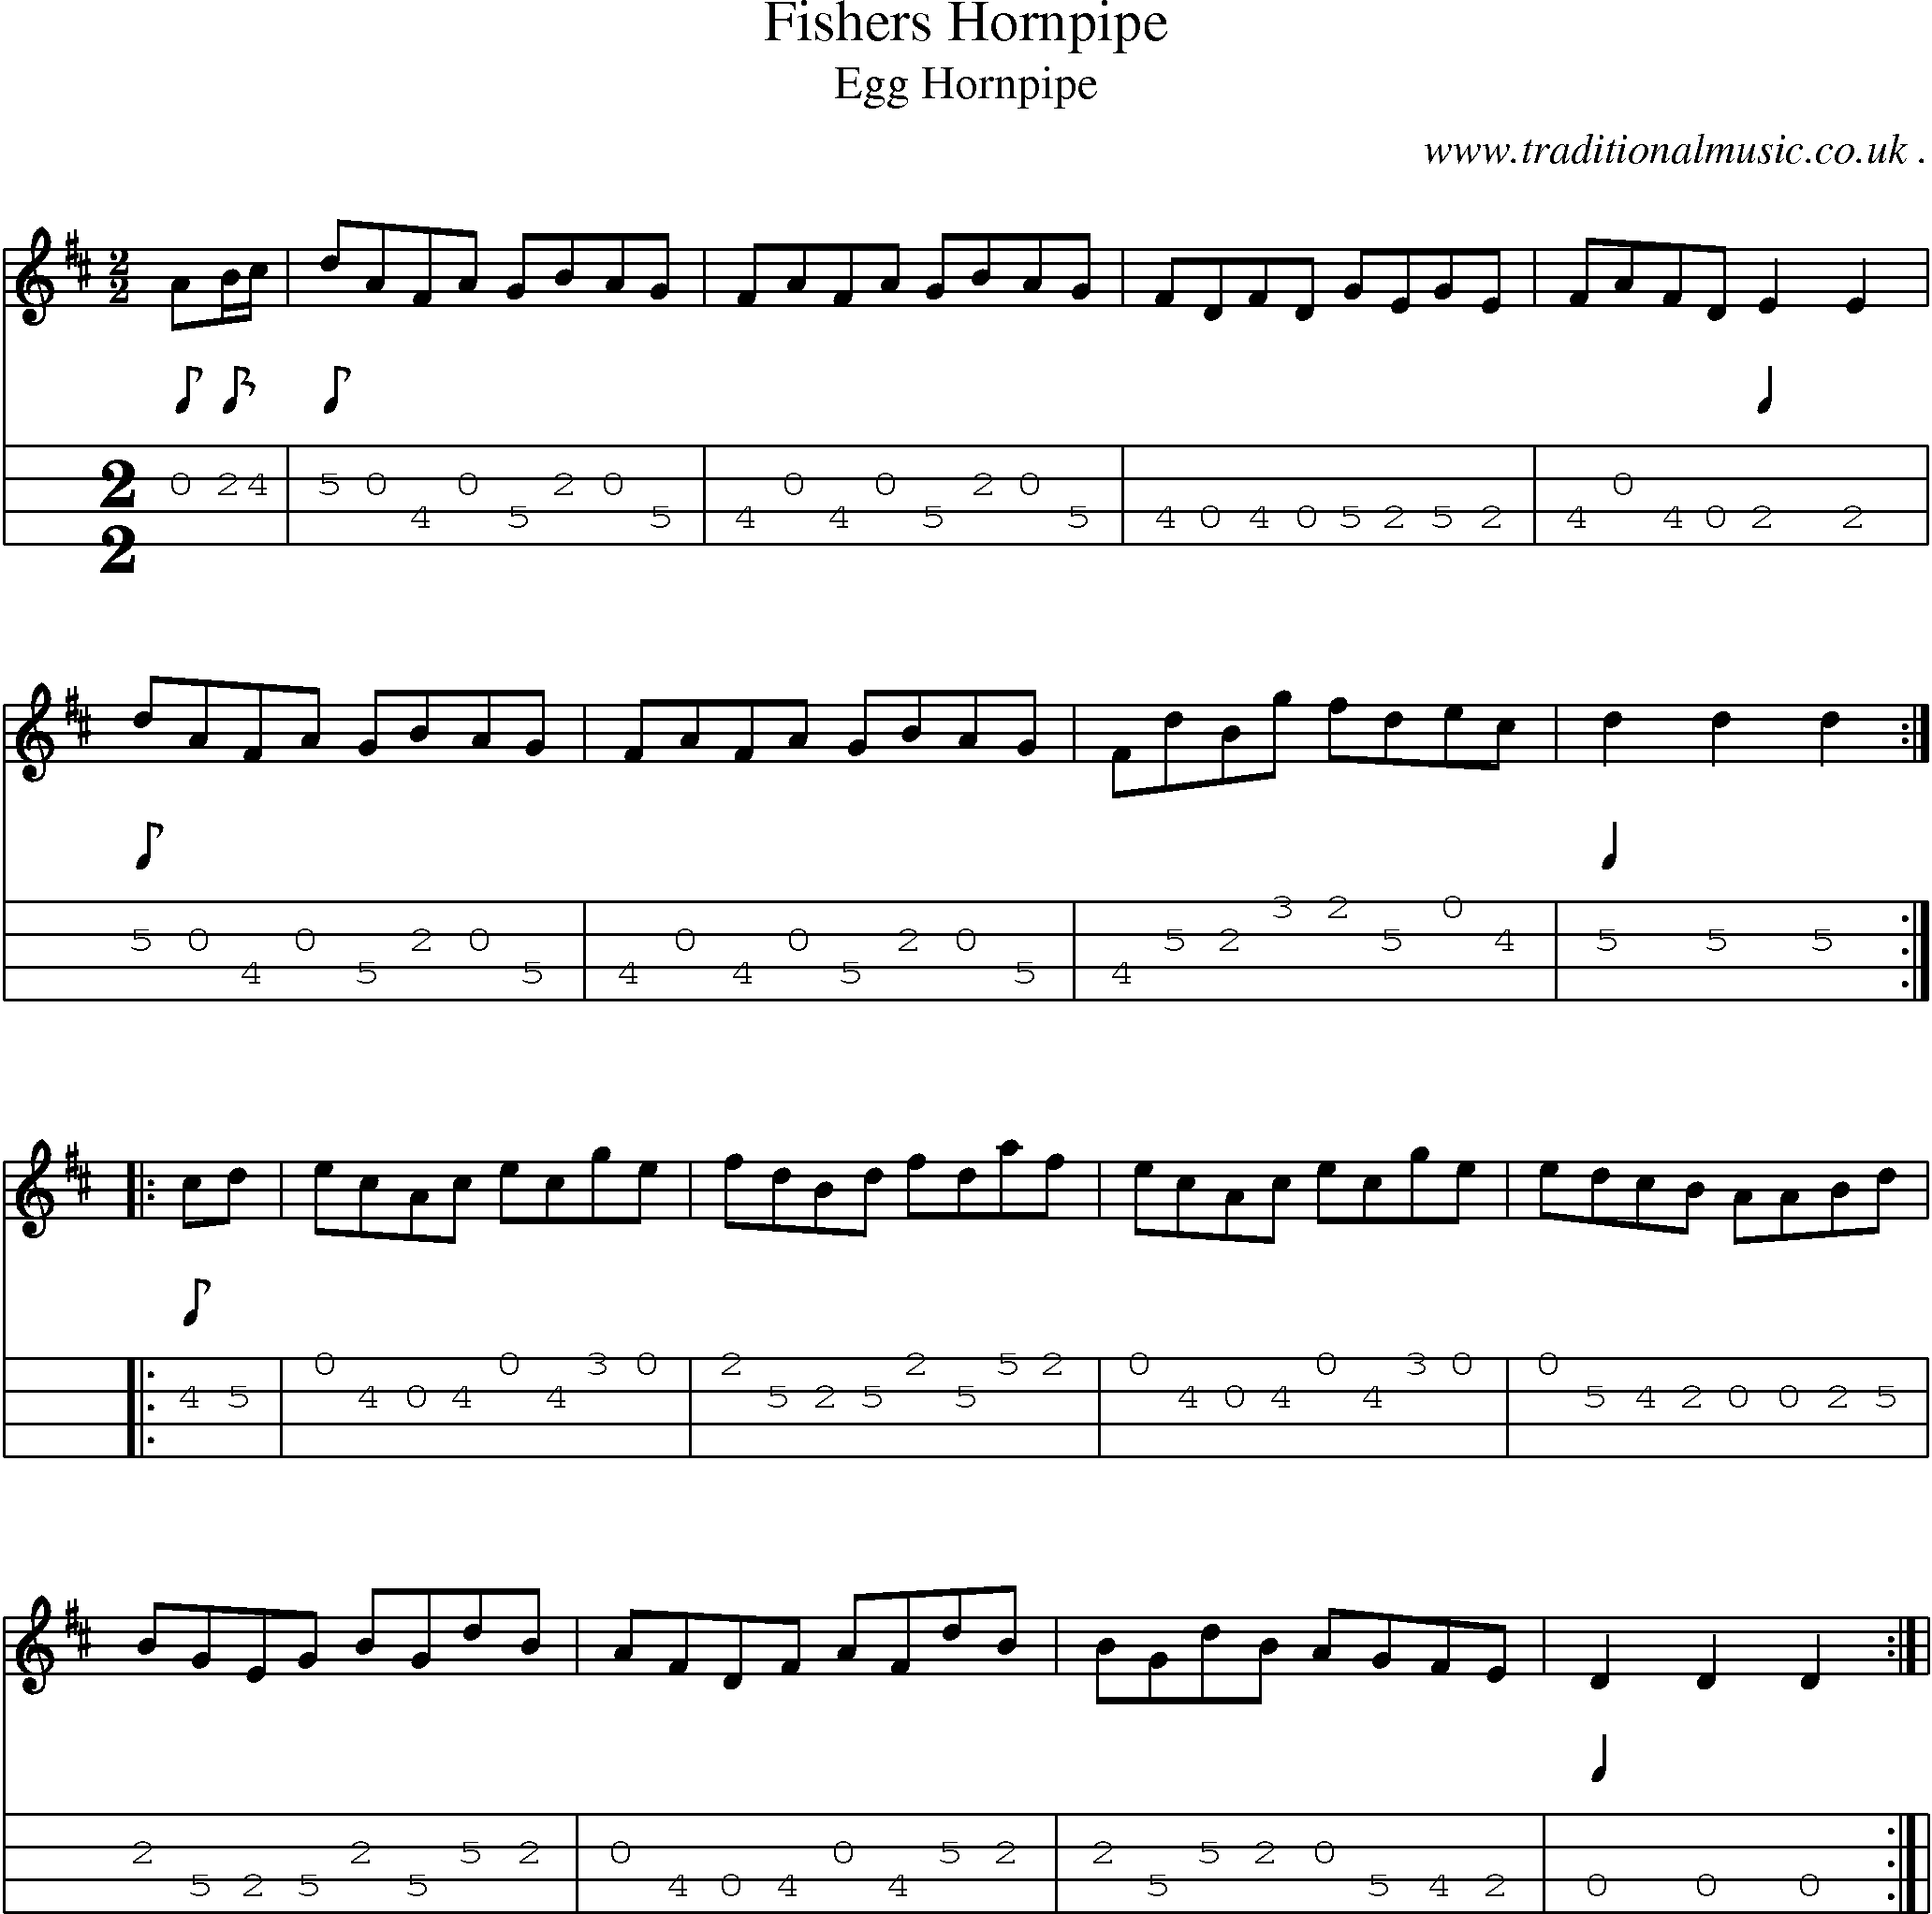 Sheet-Music and Mandolin Tabs for Fishers Hornpipe